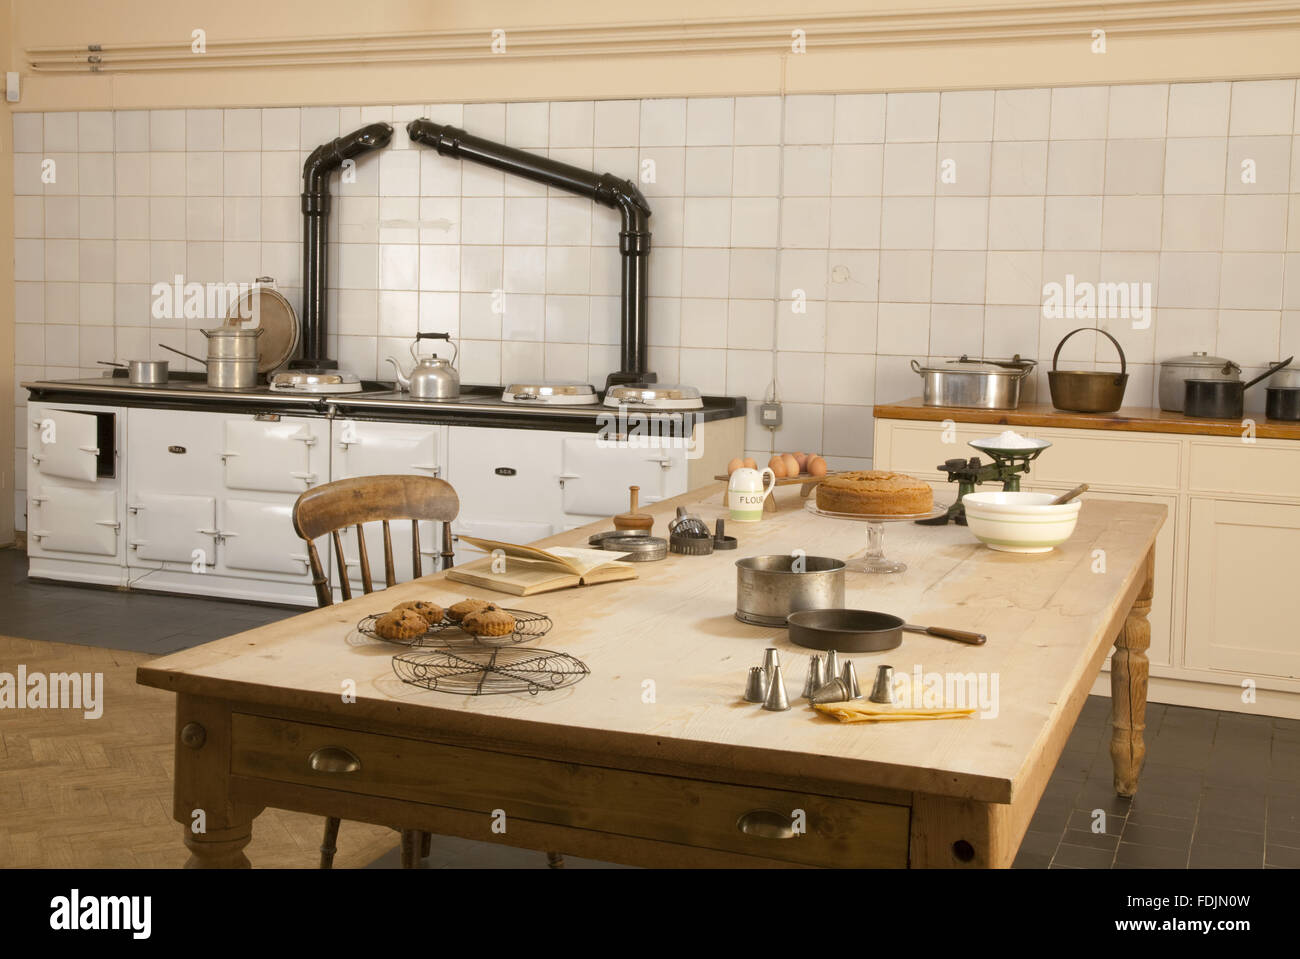 The Kitchen at Upton House, Warwickshire. The Aga is in the background, with the kitchen table in the foreground. The cakes on the table have been made to an original 1930s recipe. Stock Photo